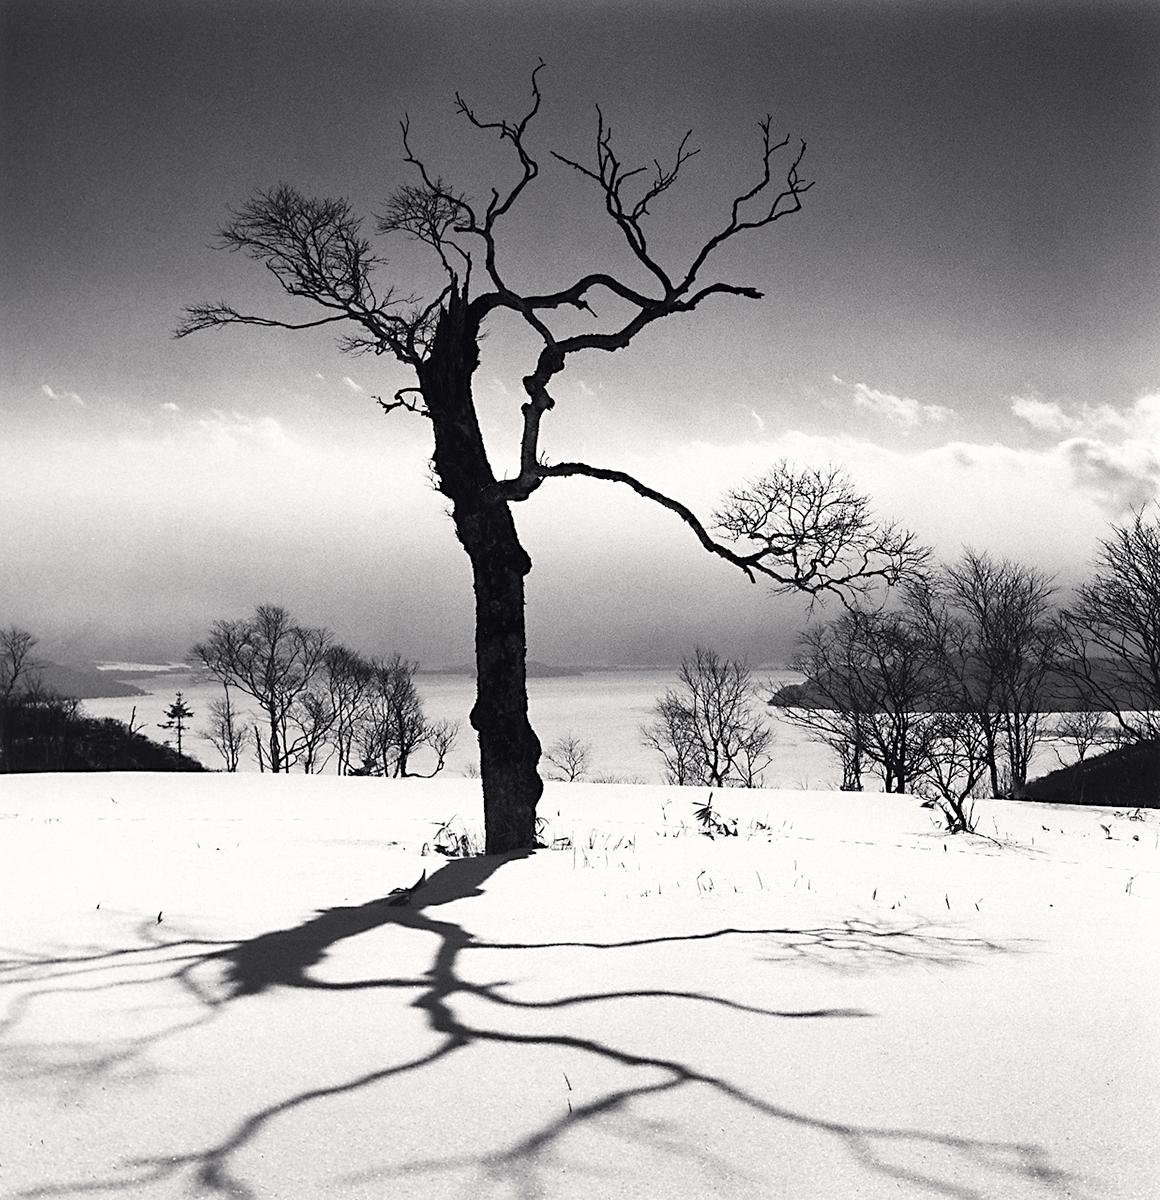 Tree and Kussharo Lake, Akan-Mashu Park, Hokkaido, Japan by Michael Kenna is a 8 x 8 inch* silver gelatin print, available in an edition of 25.
*Please note: the measurements of this print are approximated
This photograph is signed, titled, negative